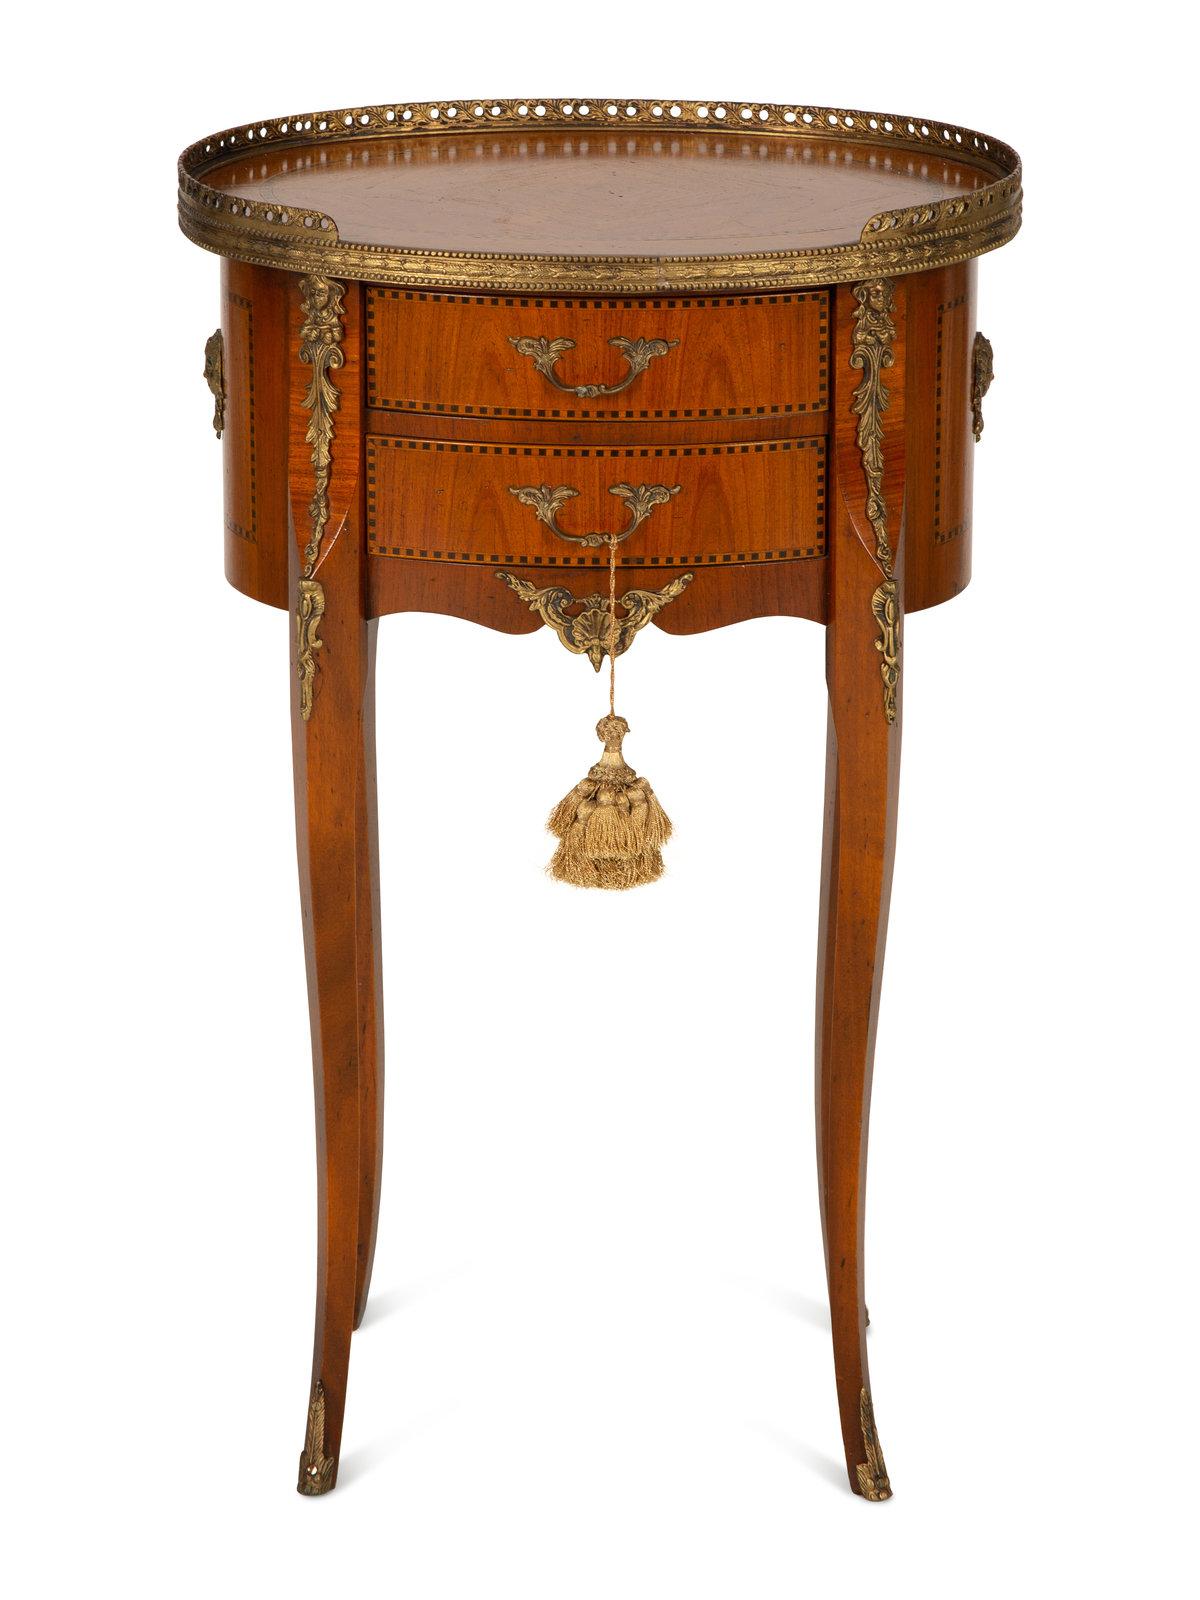 Italian Louis XV/XVI Transitional style gilt metal mounted fruitwood side table with a brass gallery and two drawers, 20th century bearing a Baggio Annico label and numbered 8205 to the underside of the lower drawer. Measures: Height 27 1/8 x width